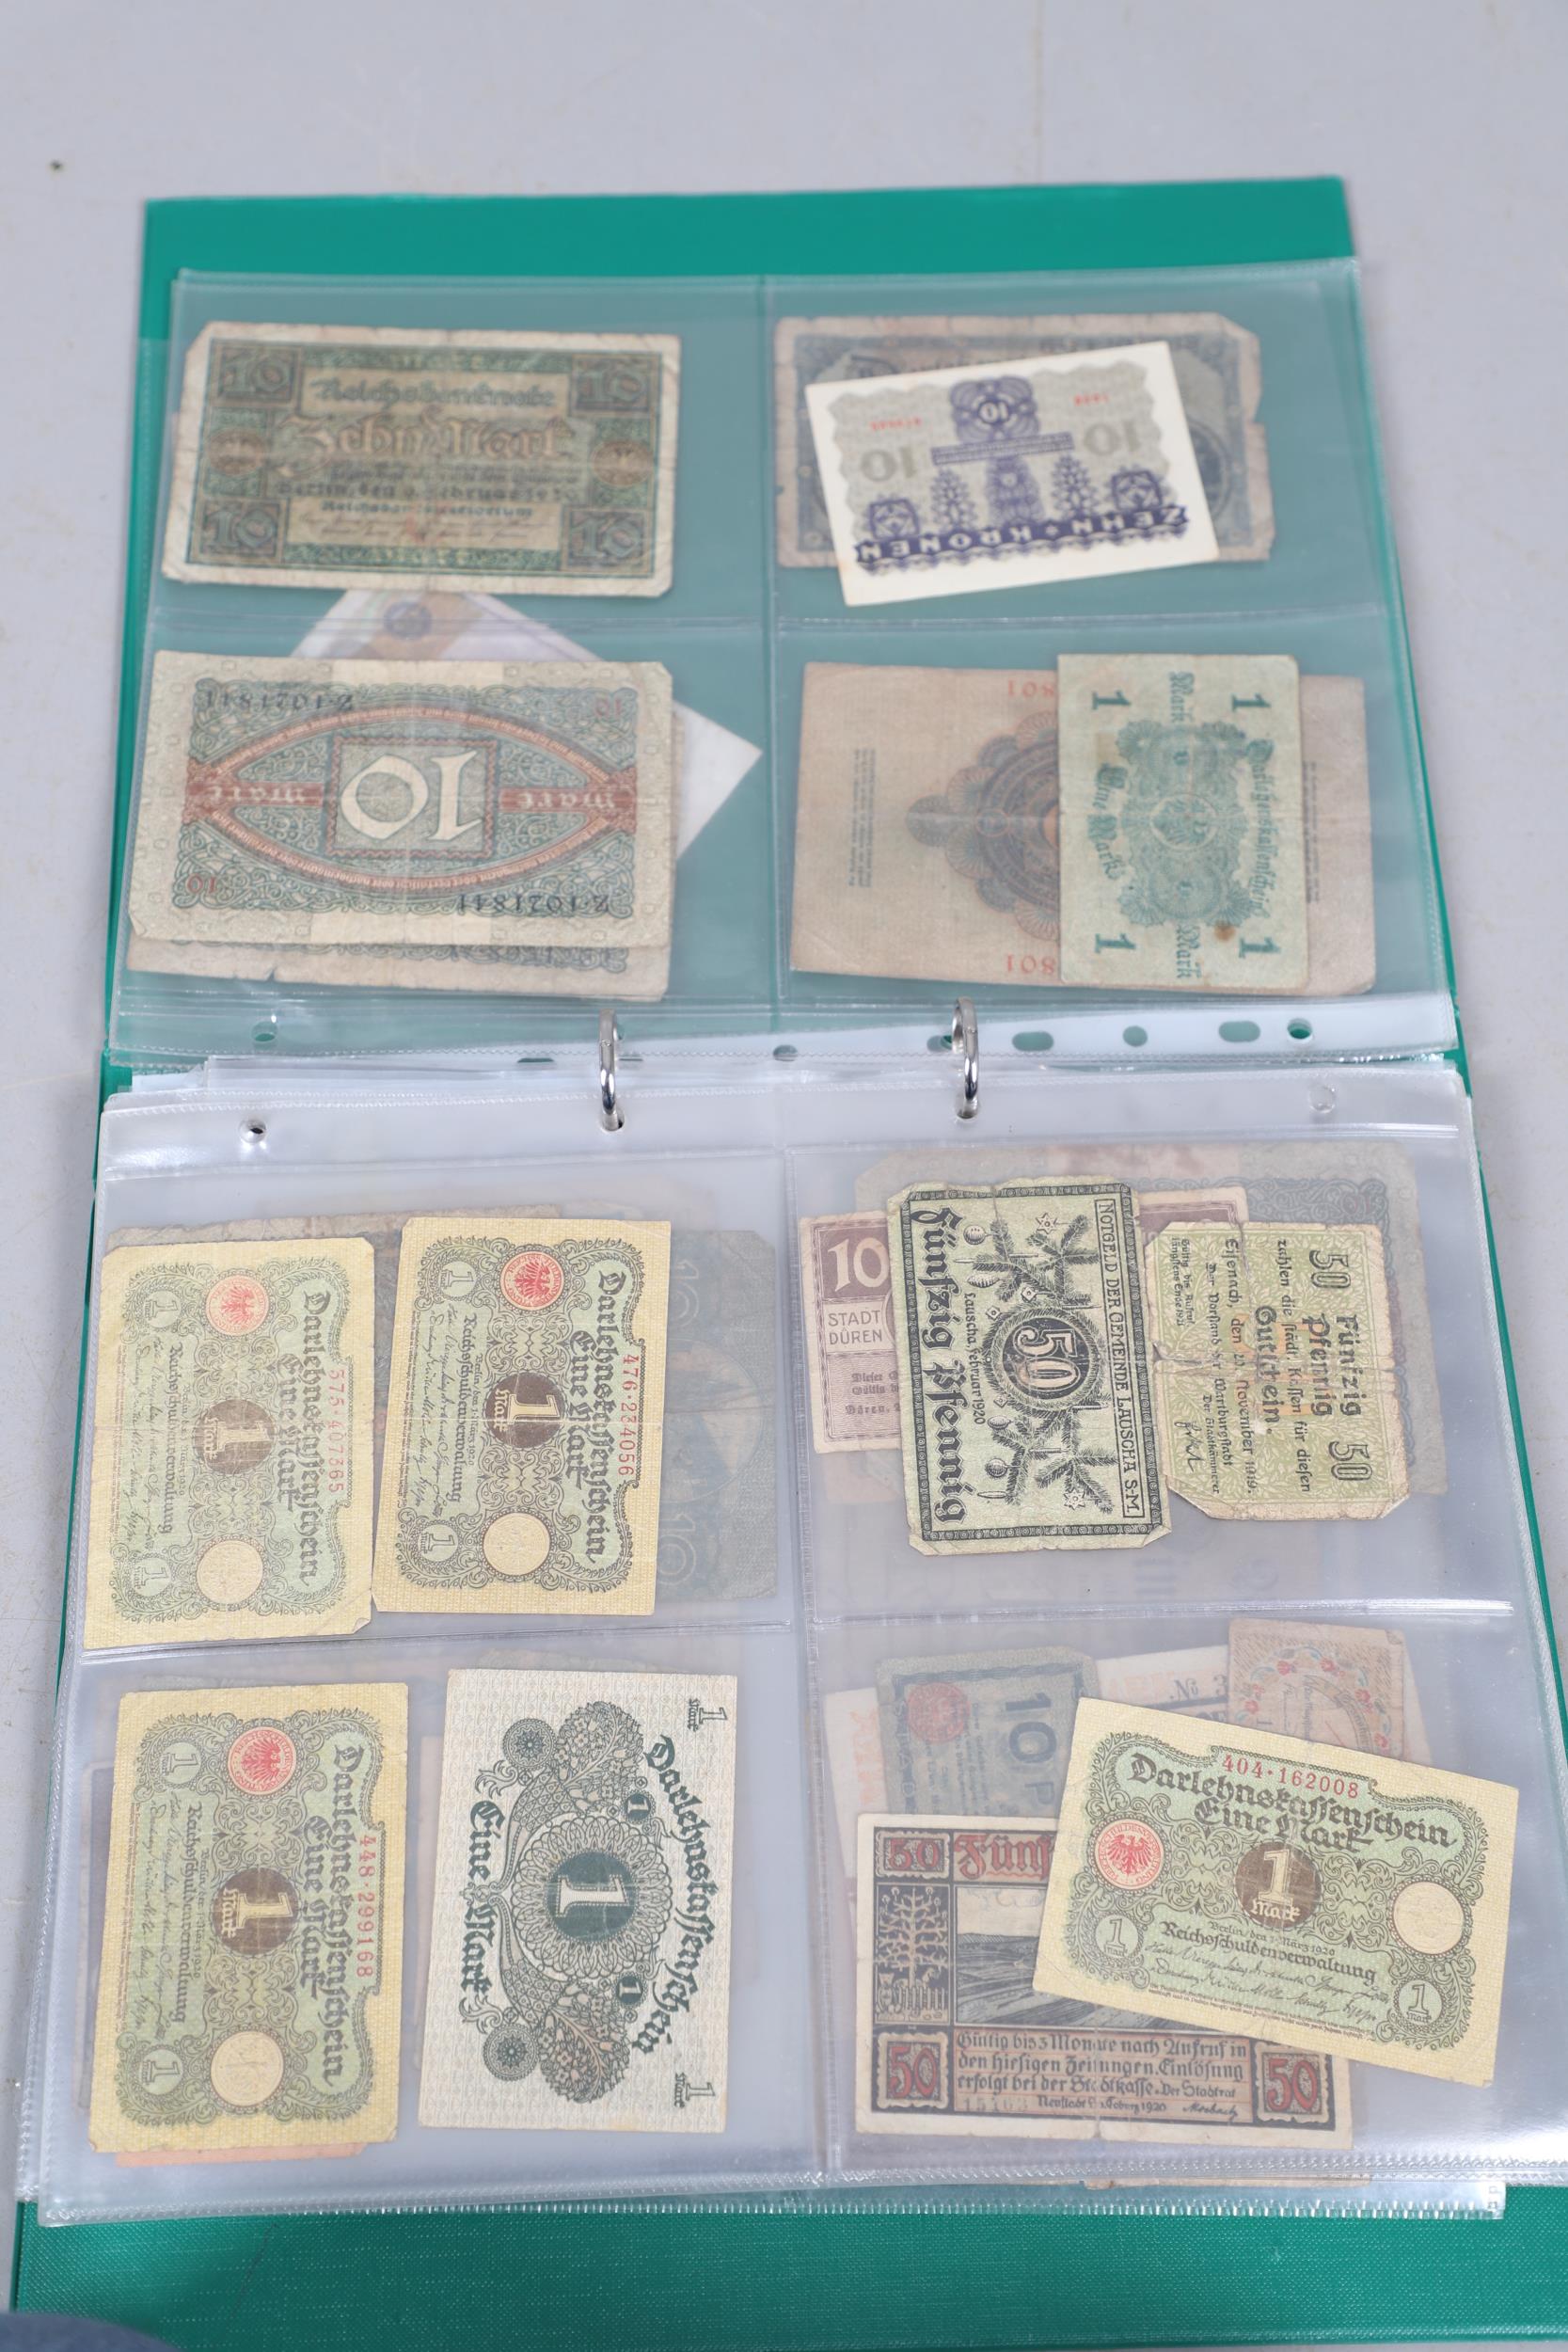 AN EXTENSIVE COLLECTION OF WORLD BANKNOTES. - Image 50 of 56